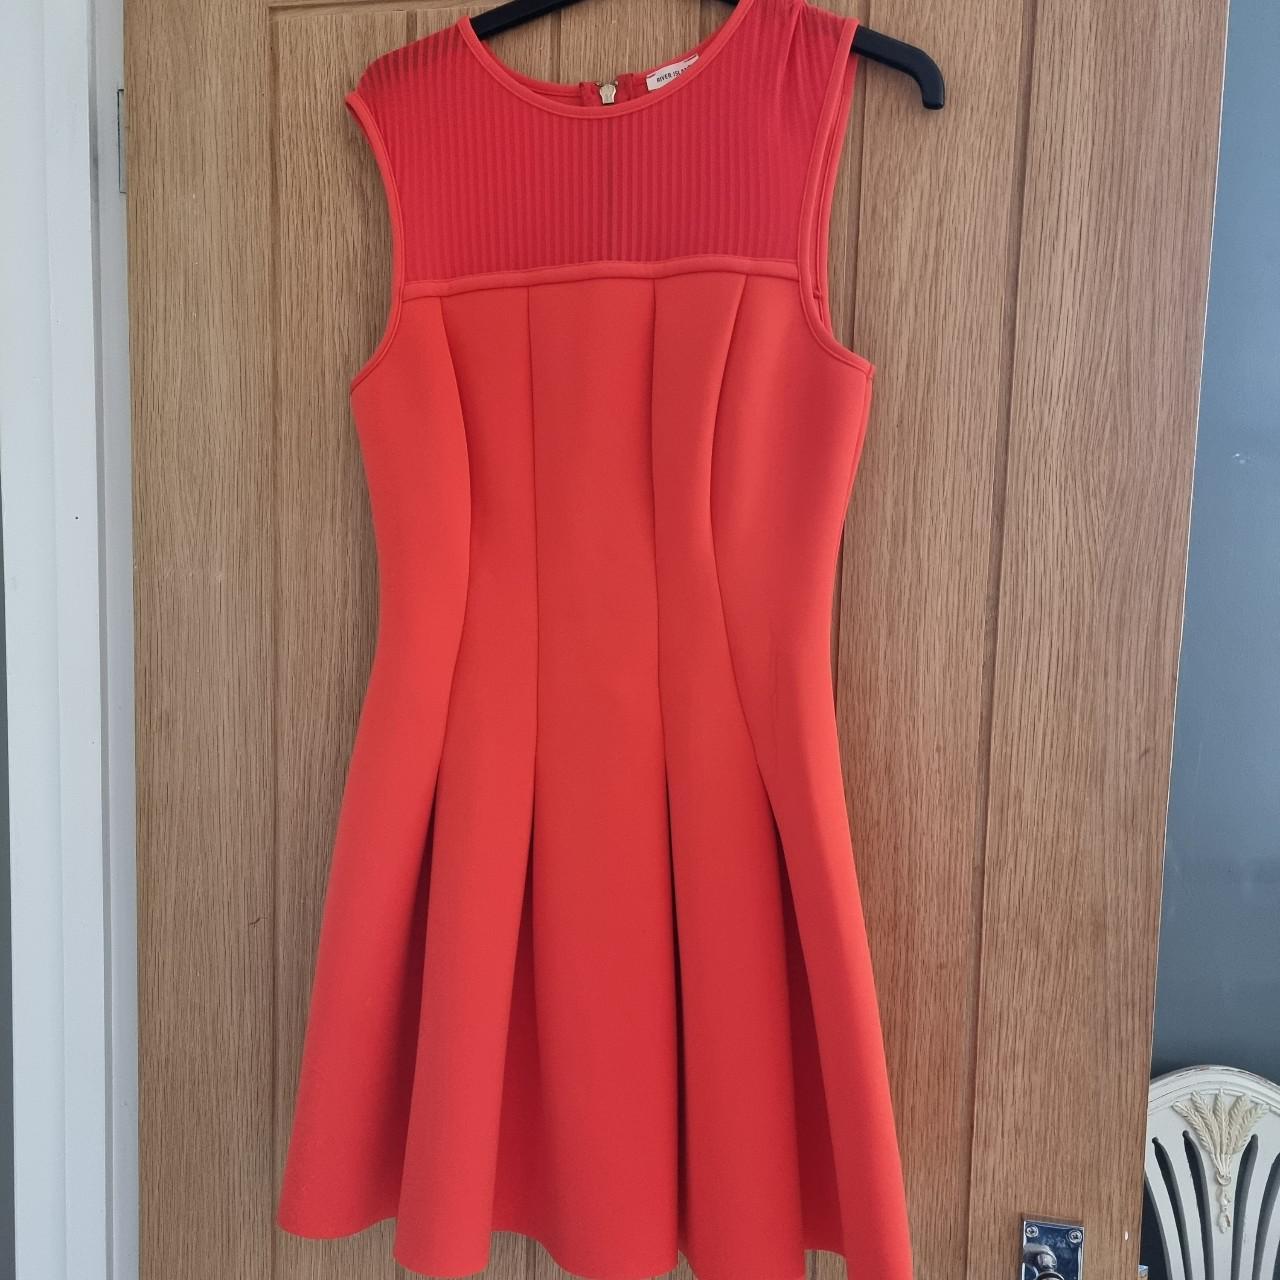 Red River Island skater dress, bought and never... - Depop